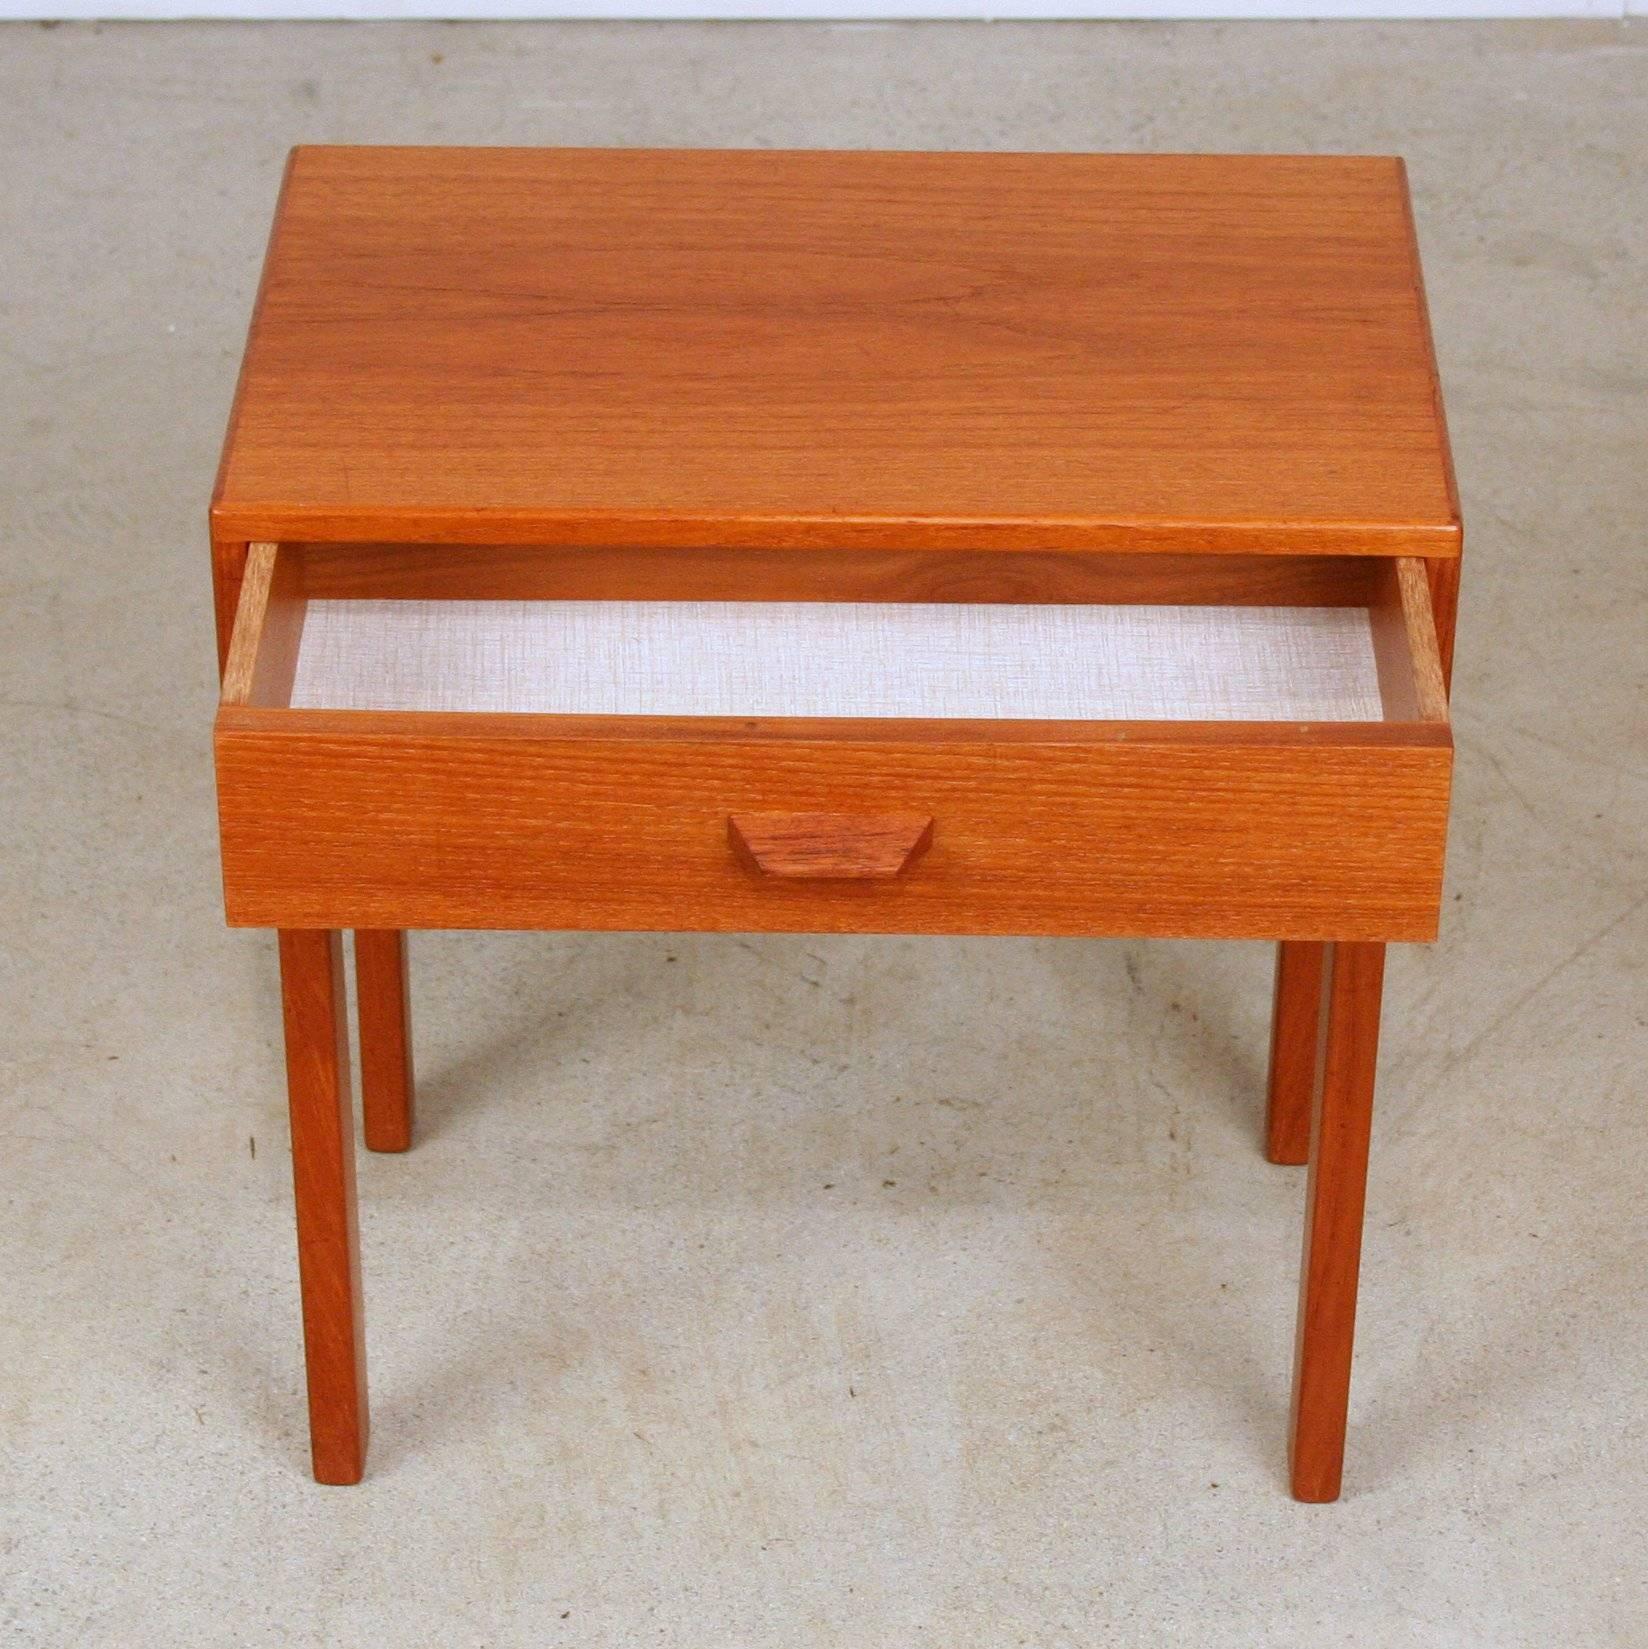 Vintage Danish Teak Nightstand In Excellent Condition For Sale In Vancouver, BC